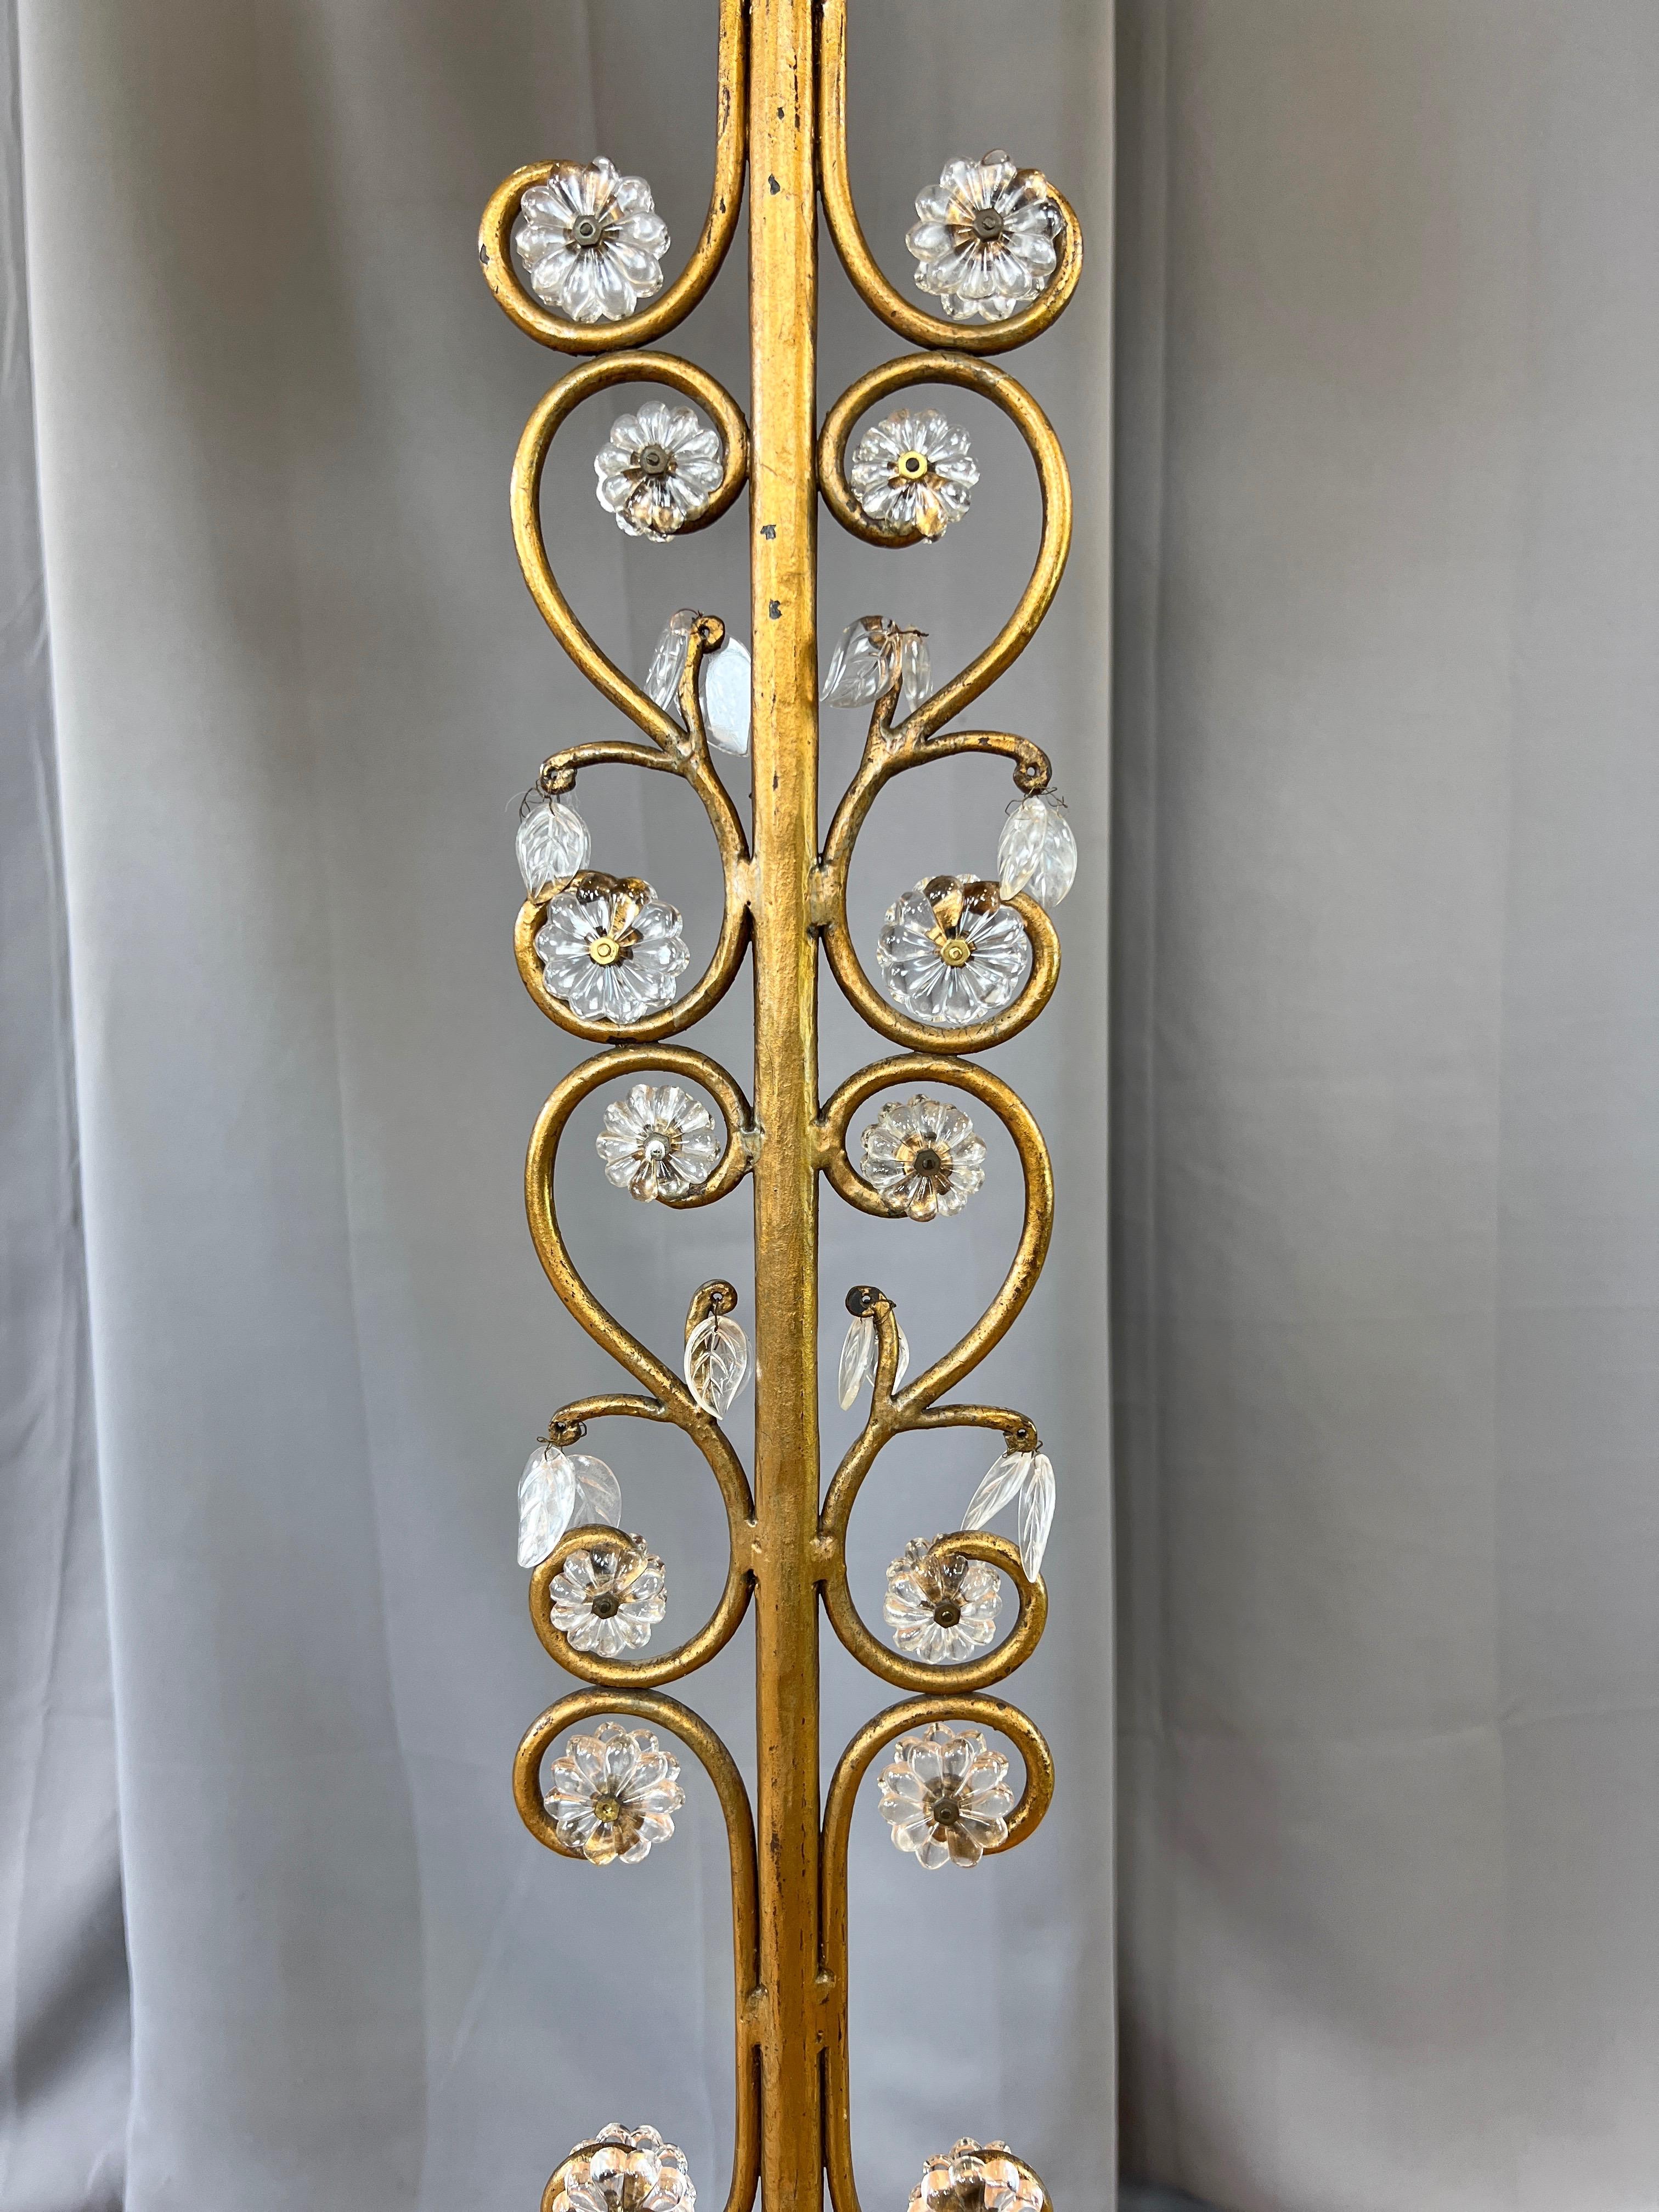 Pair of Italian Gilt Wrought Iron Floor Lamps with Glass Florets & Leaves, 1950s For Sale 4